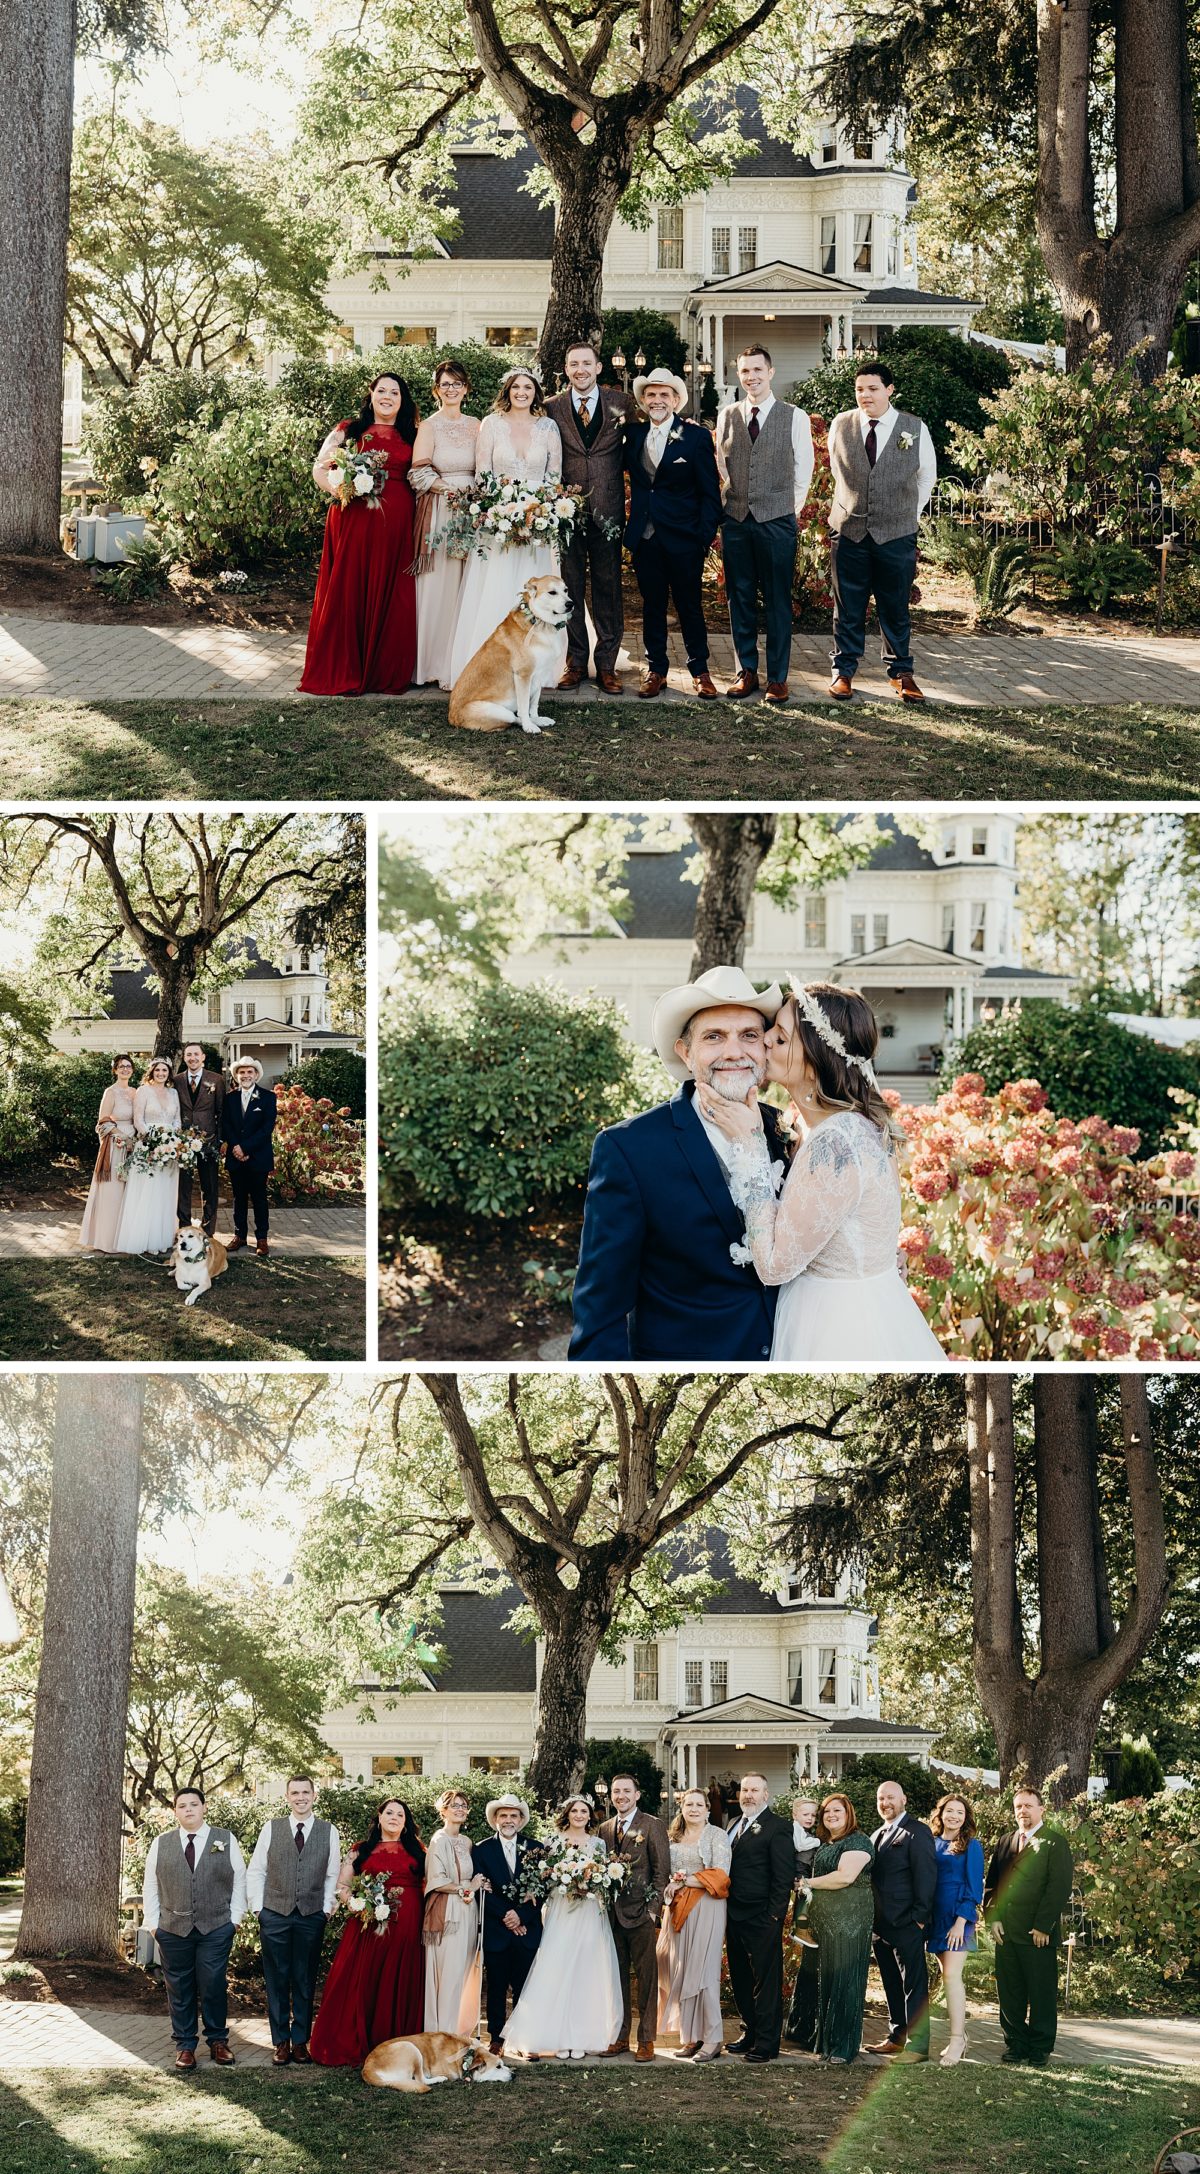 Family photos at this Victorian Belle wedding in Portland, Oregon.